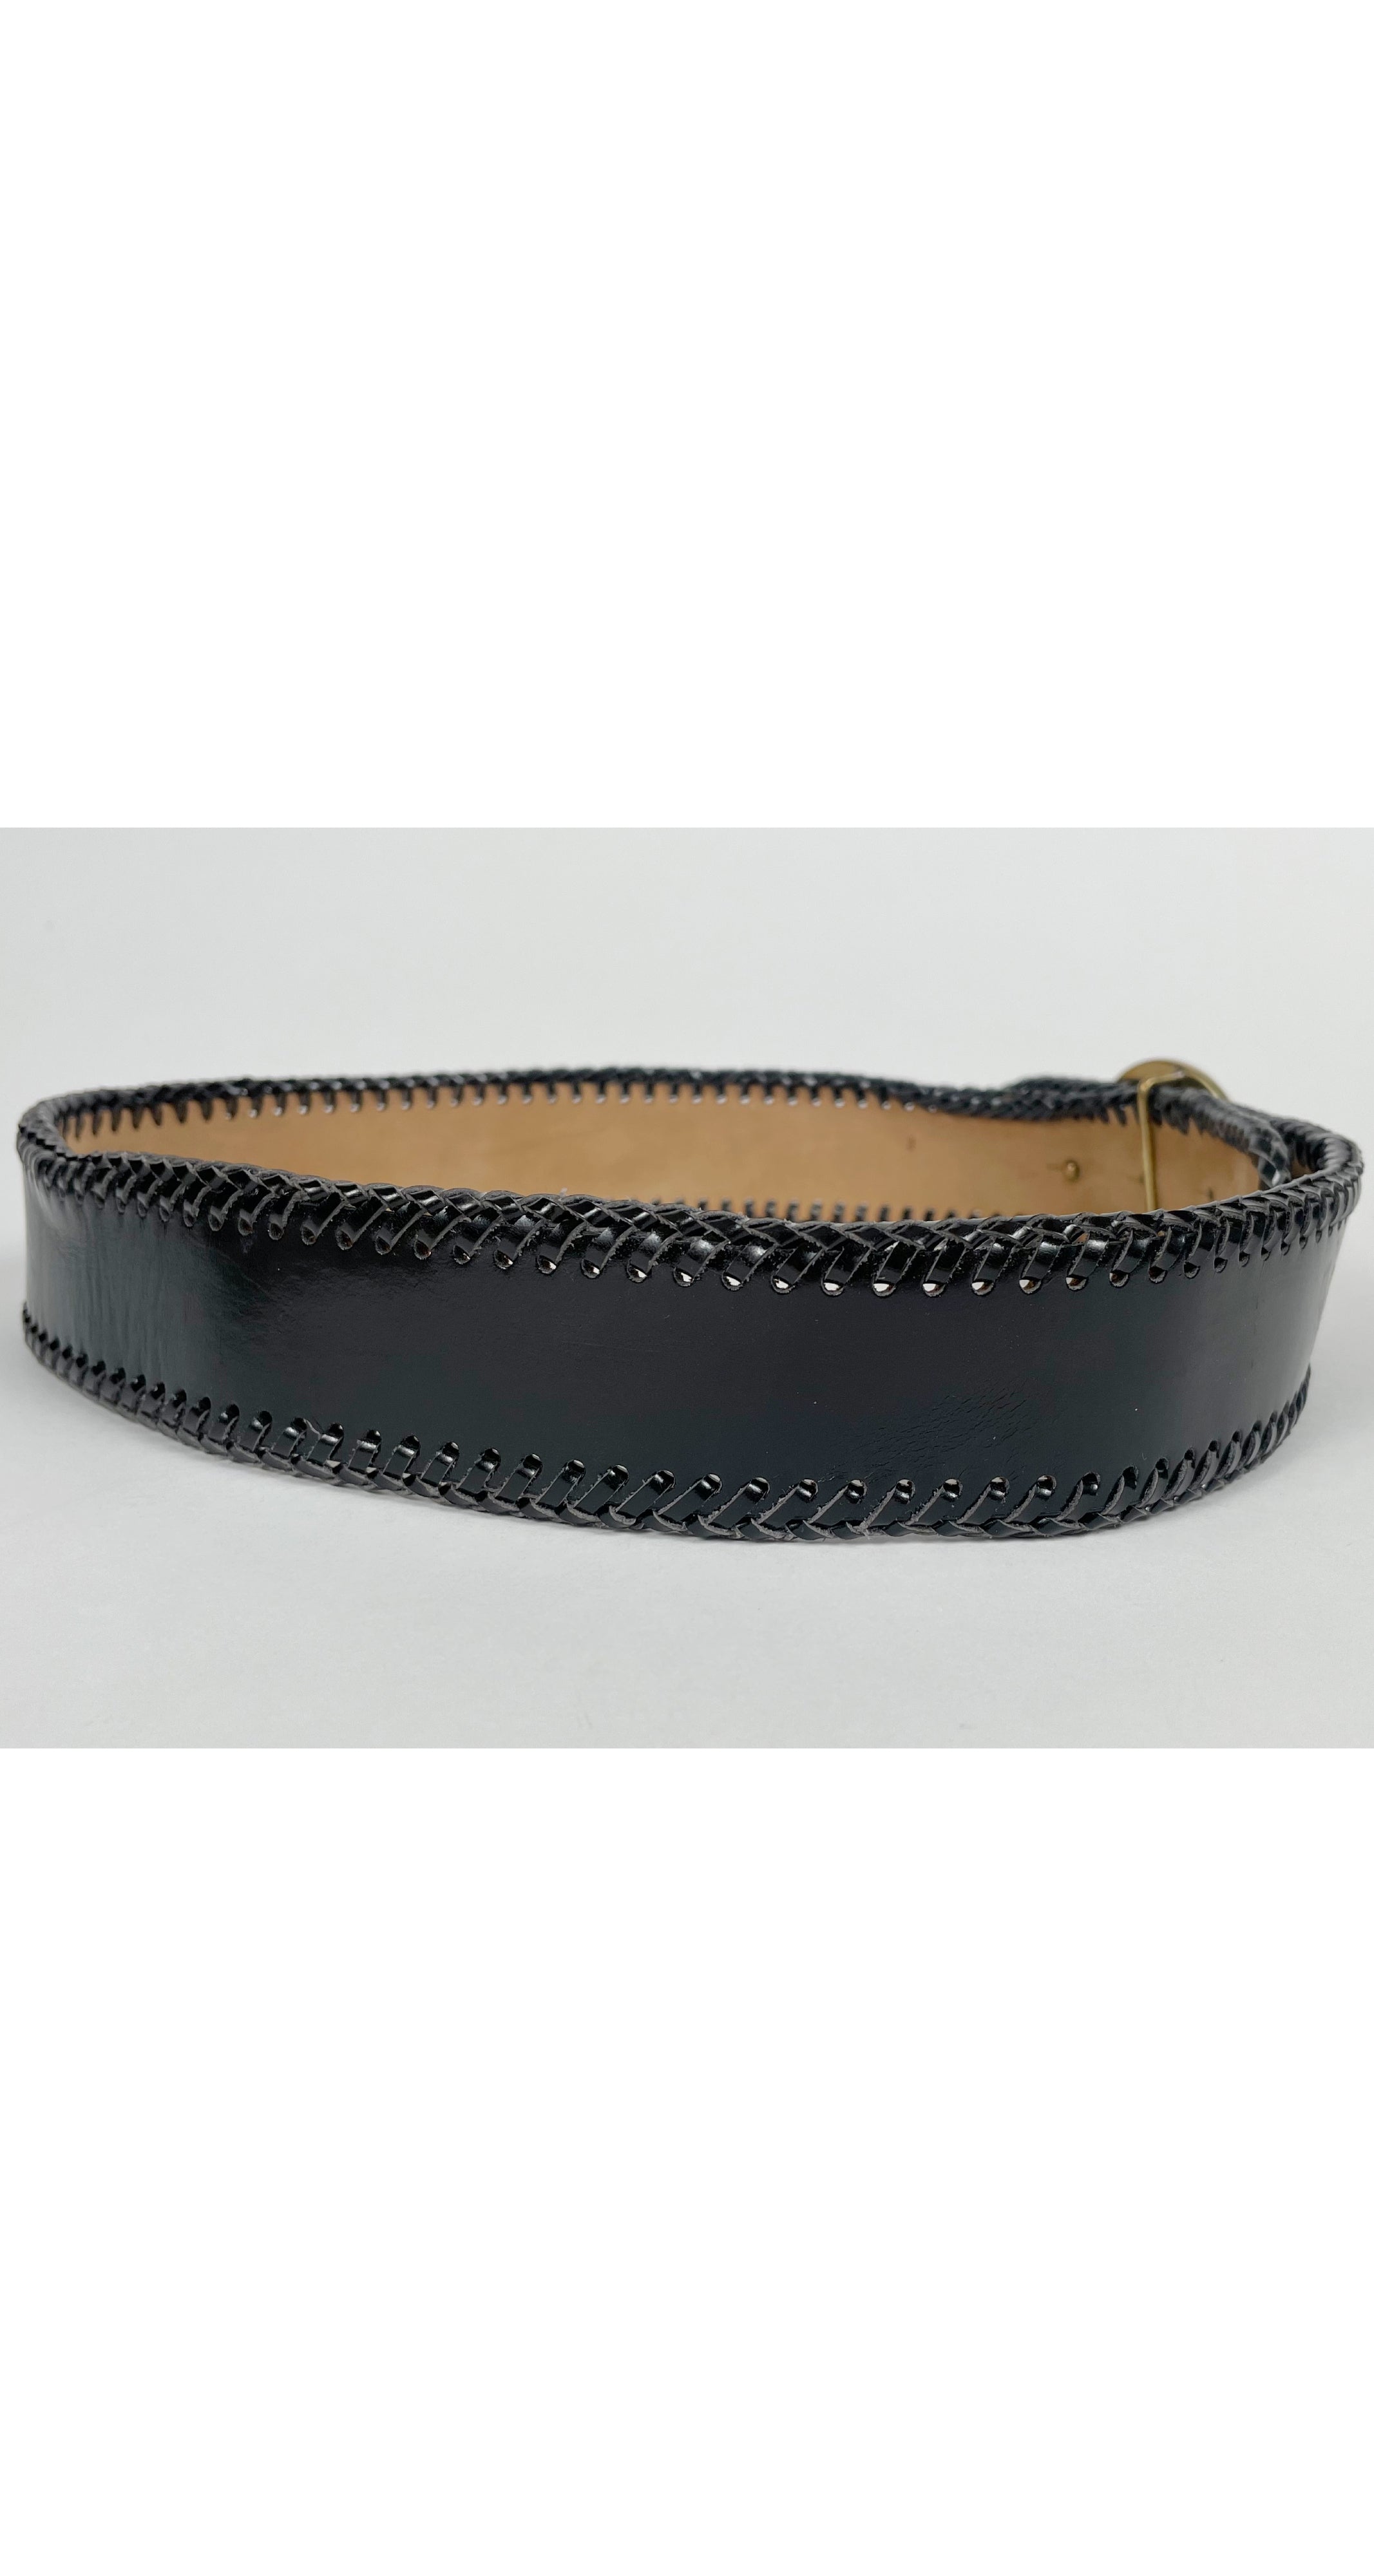 1990s "LET'S LOVE EACH OTHER" Black Whipstitch Leather Belt